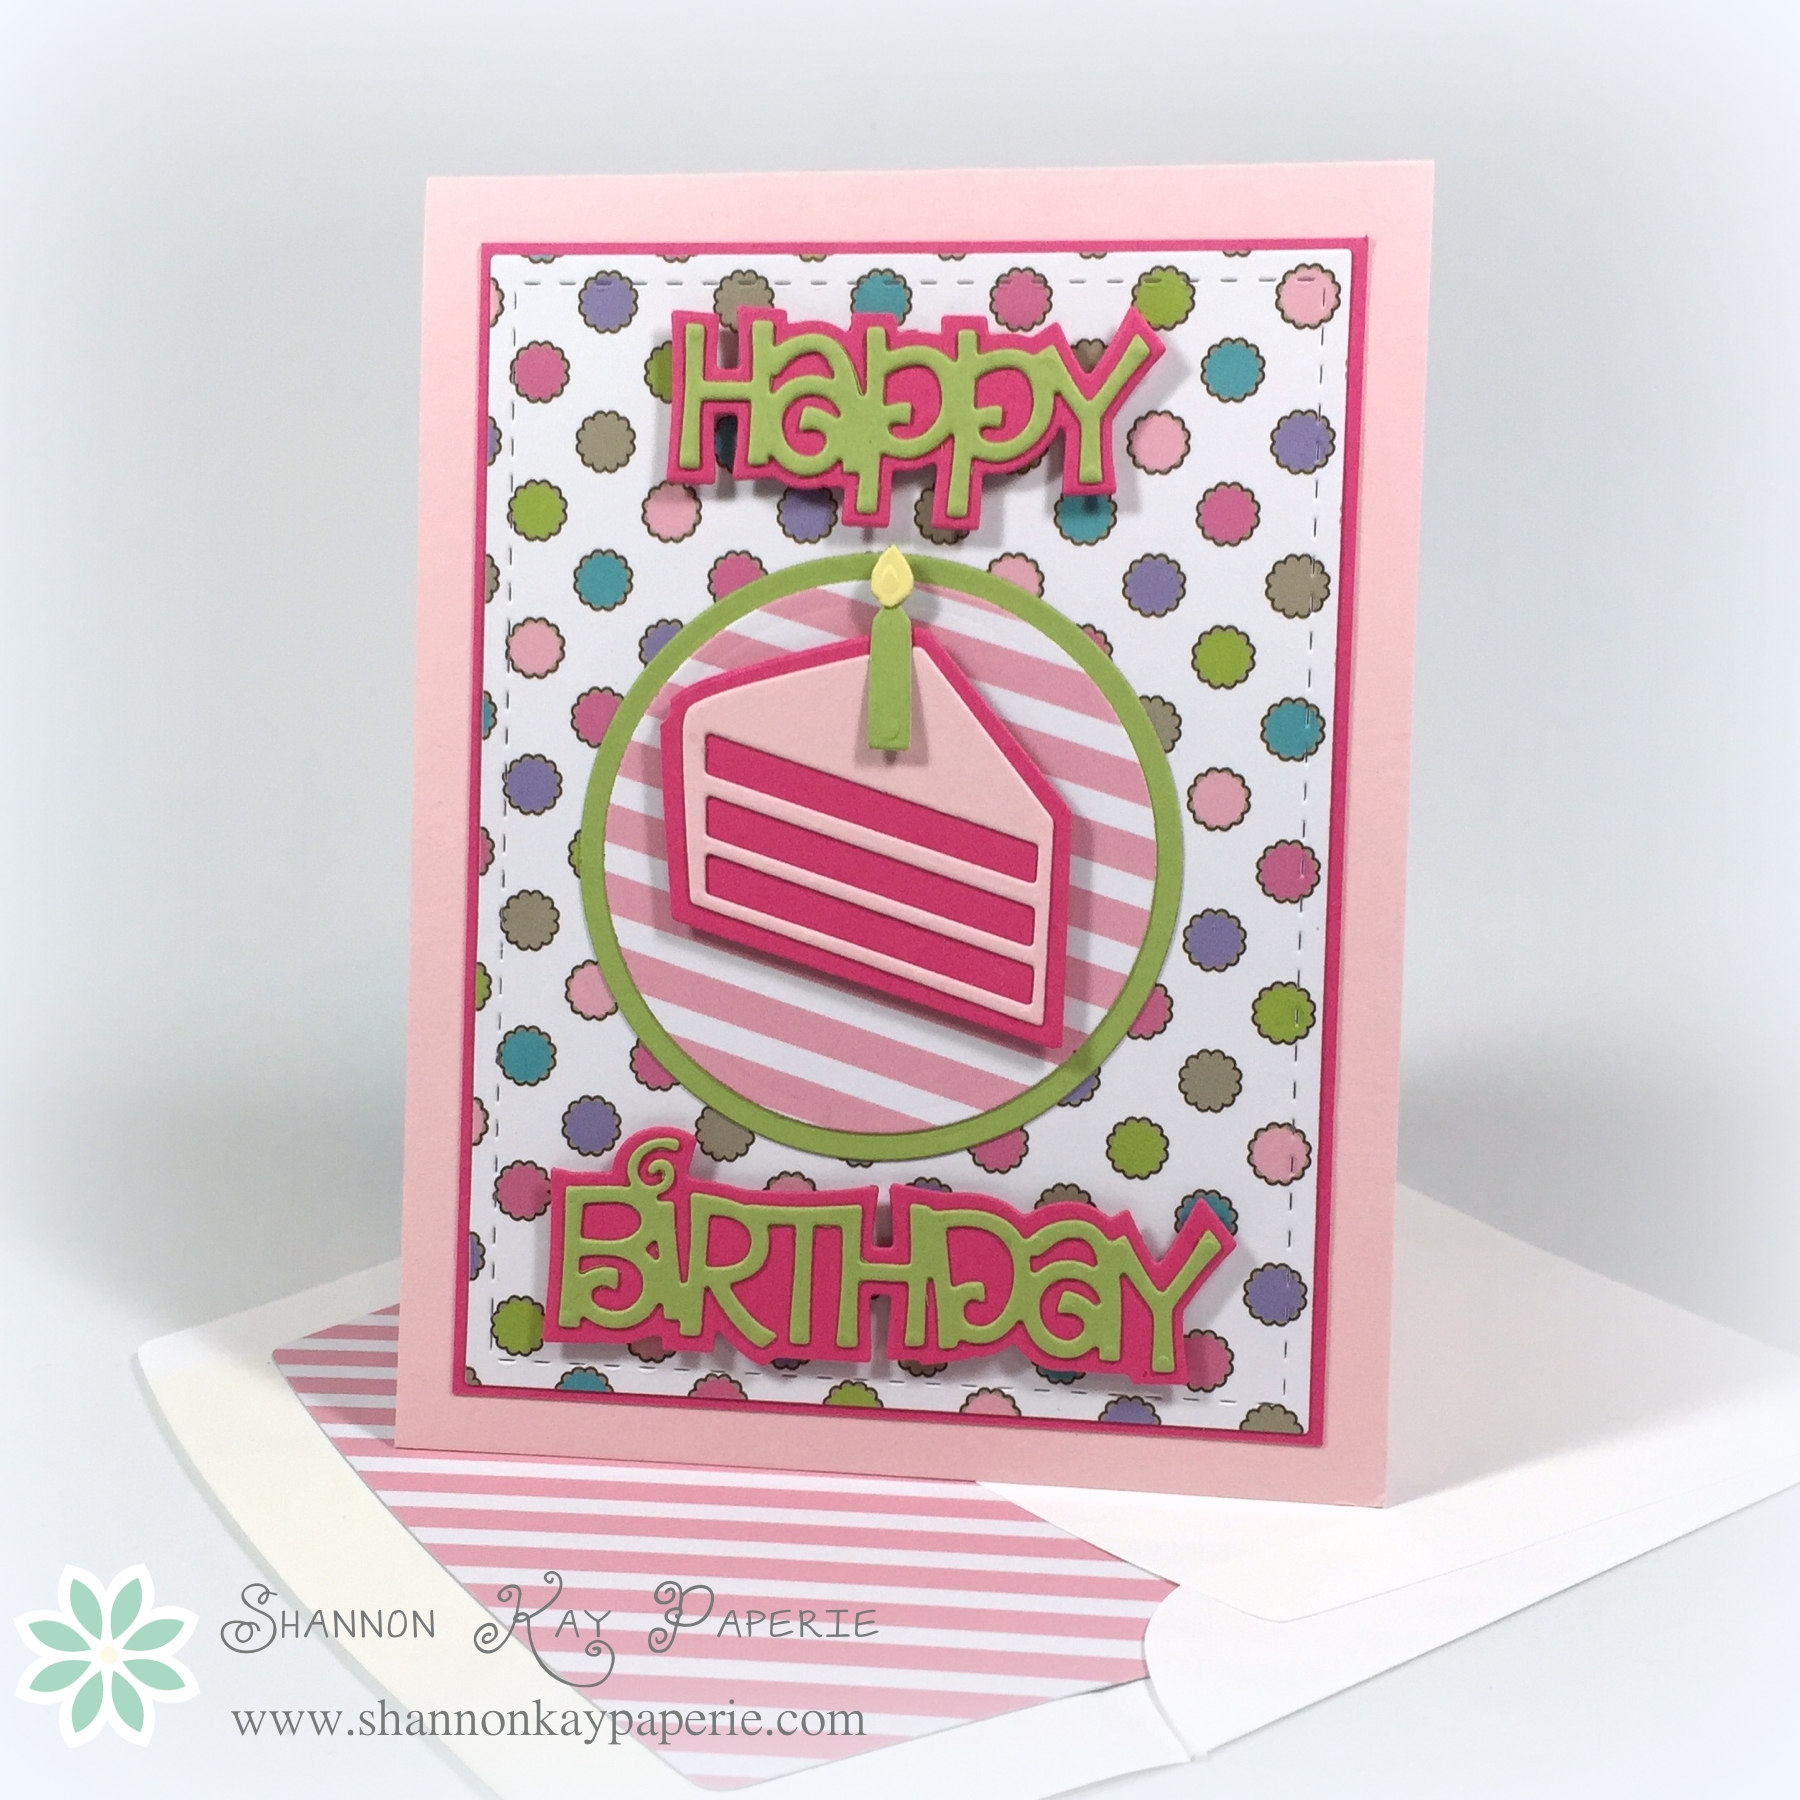 Piece of Cake Birthday Wishes - Shannon Kay Paperie